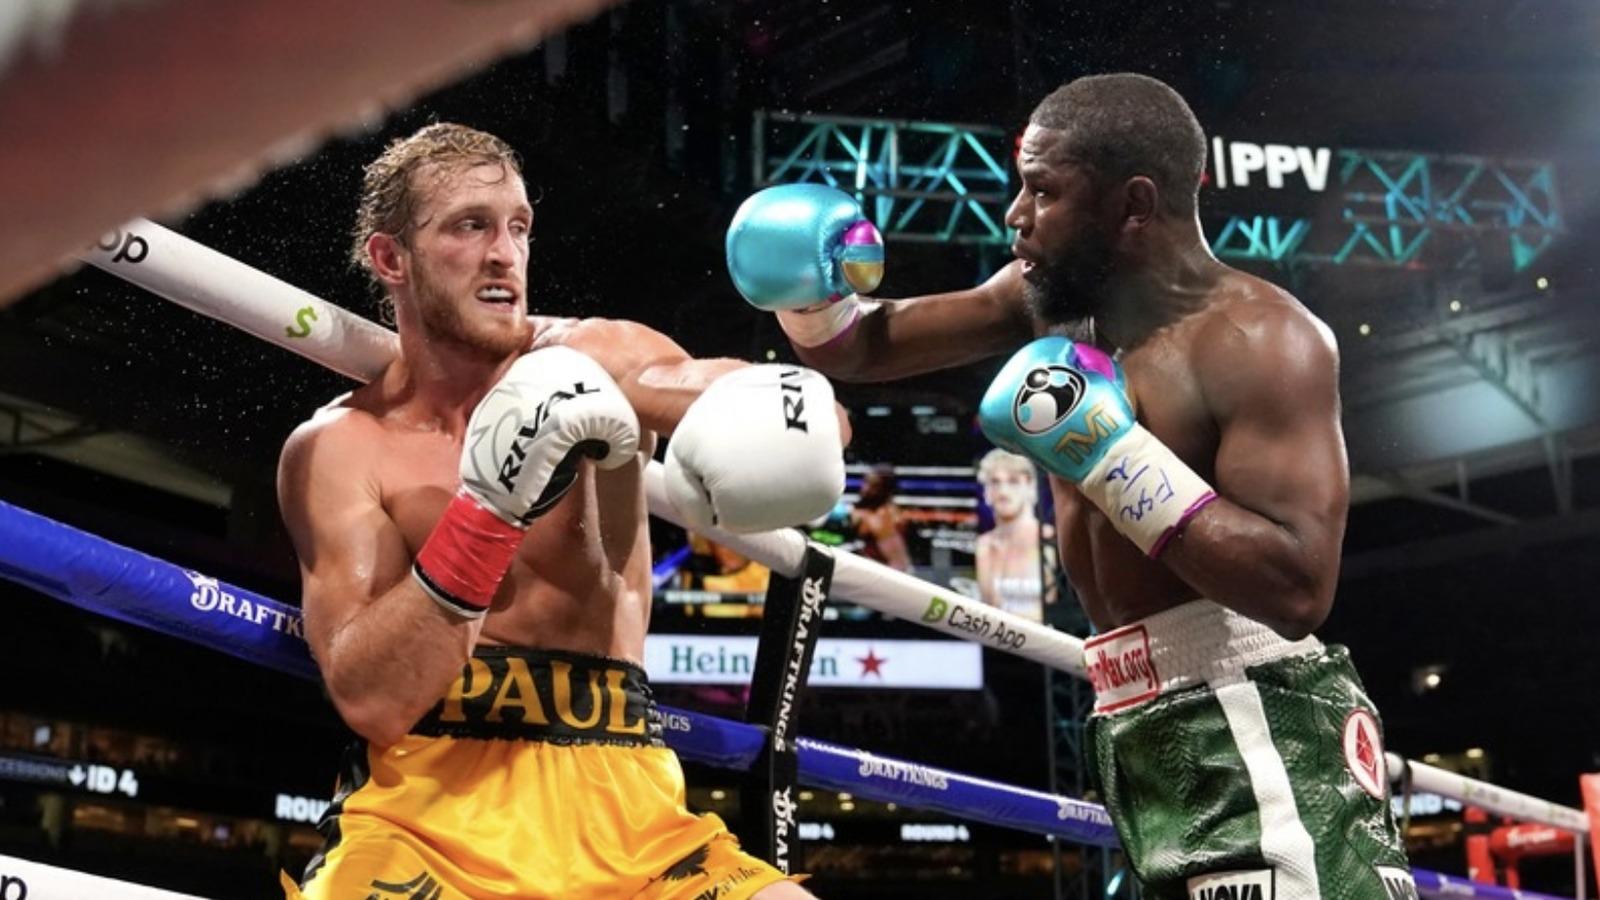 Logan Paul claims that wrestling in the WWE is more challenging than boxing Floyd Mayweather Jr.